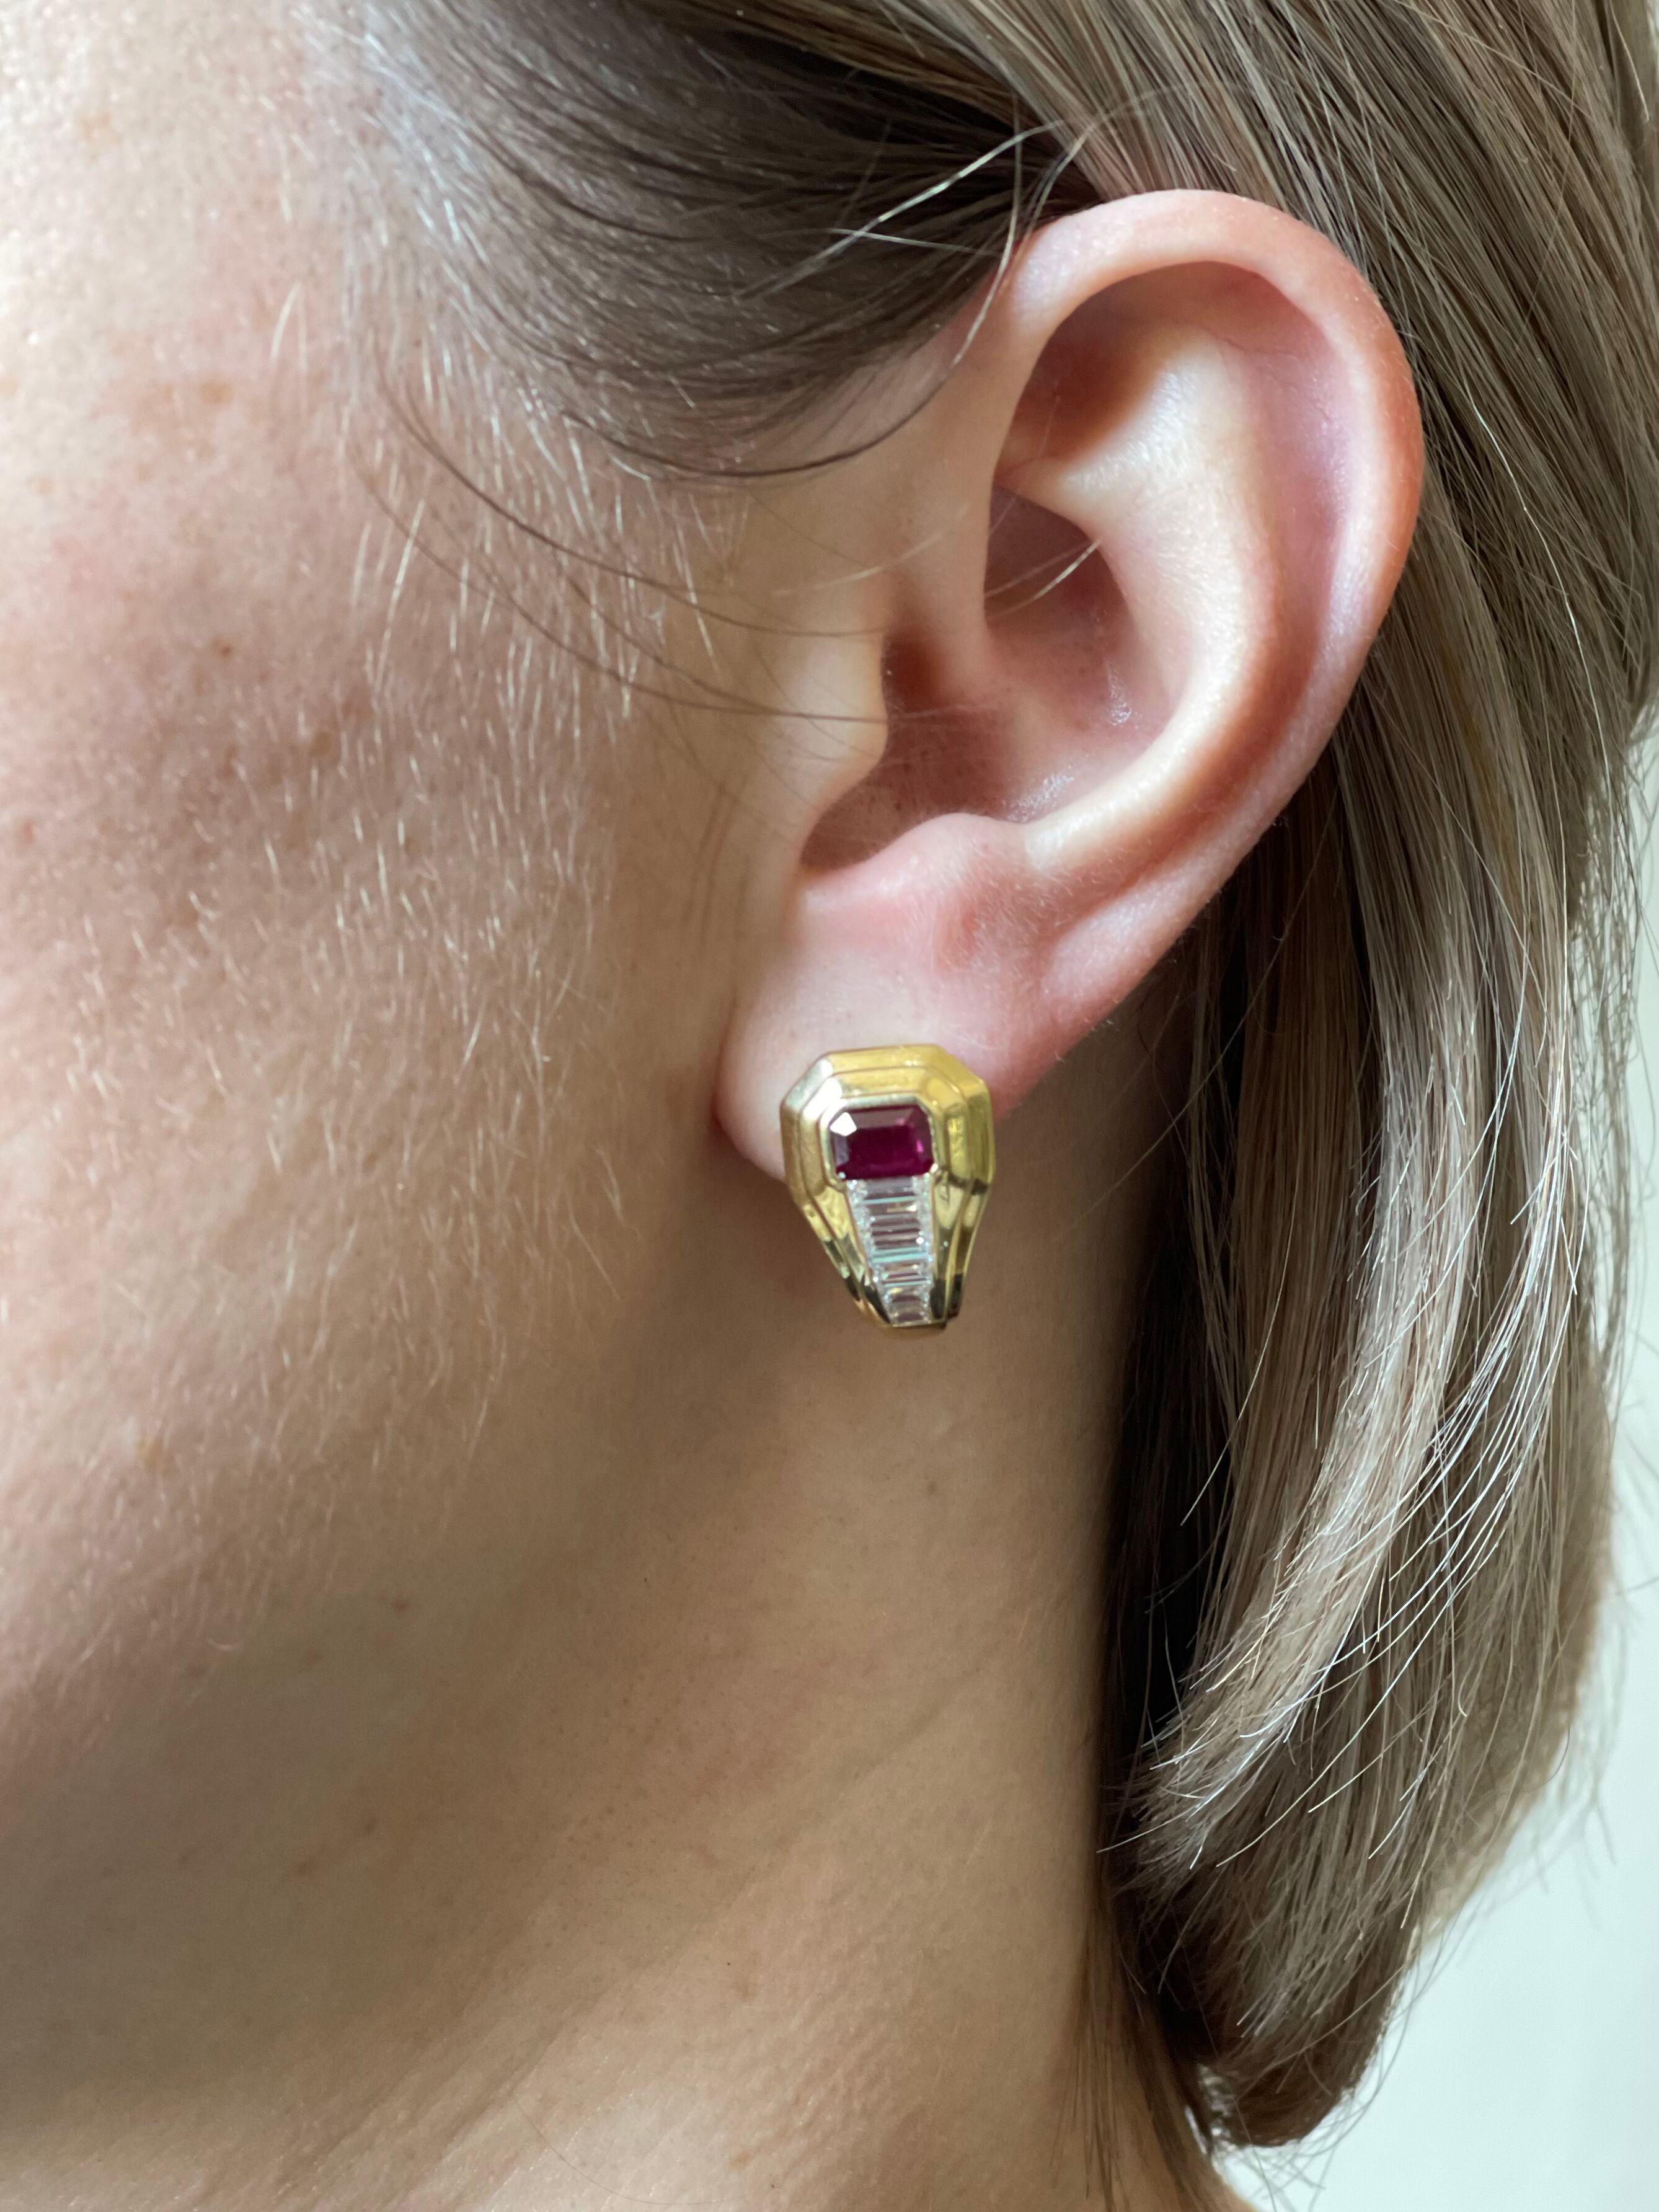 Pair of classic 18k gold earrings by Bvlgari, with vibrant rubies and baguette diamonds - approx. 0.90ctw G/VS. Earrings measure 0.75